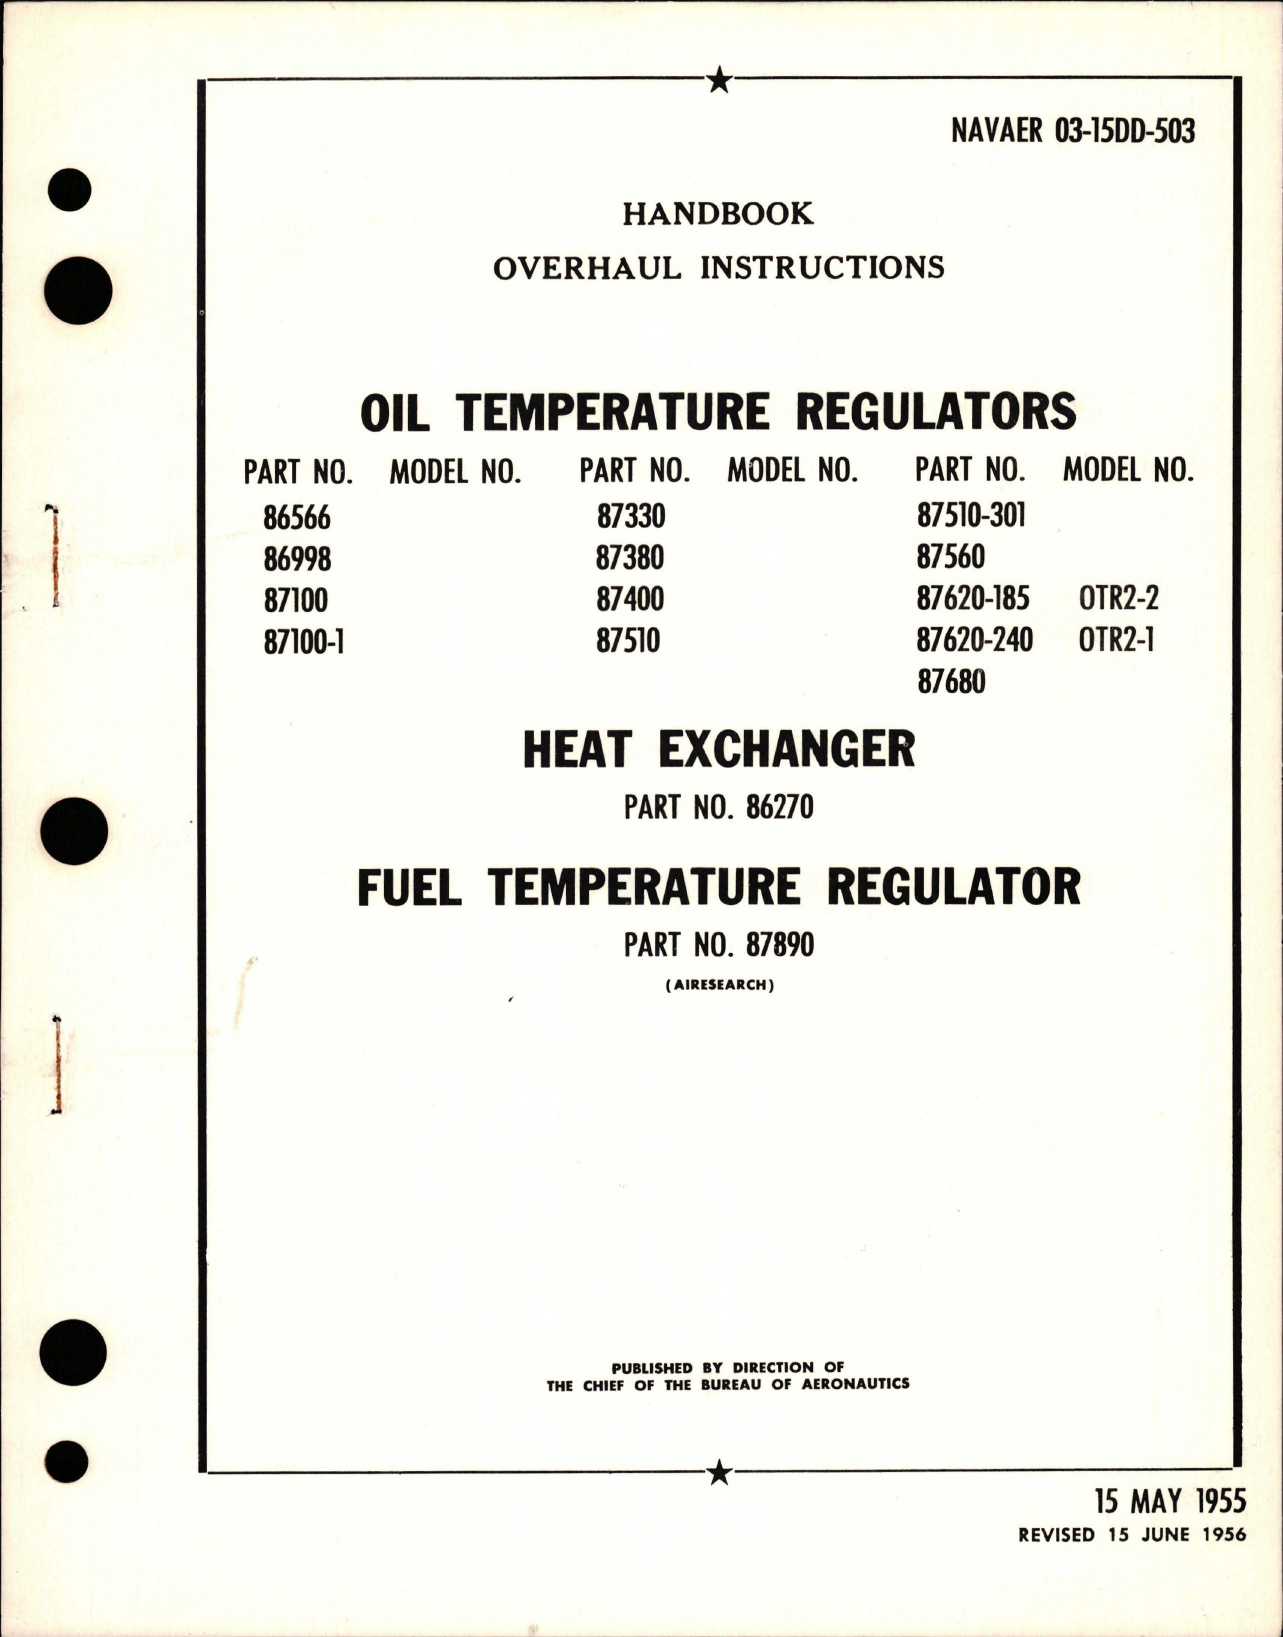 Sample page 1 from AirCorps Library document: Overhaul Instructions for Oil Temperature Regulators, Heat Exchanger and Fuel Temp Regulator